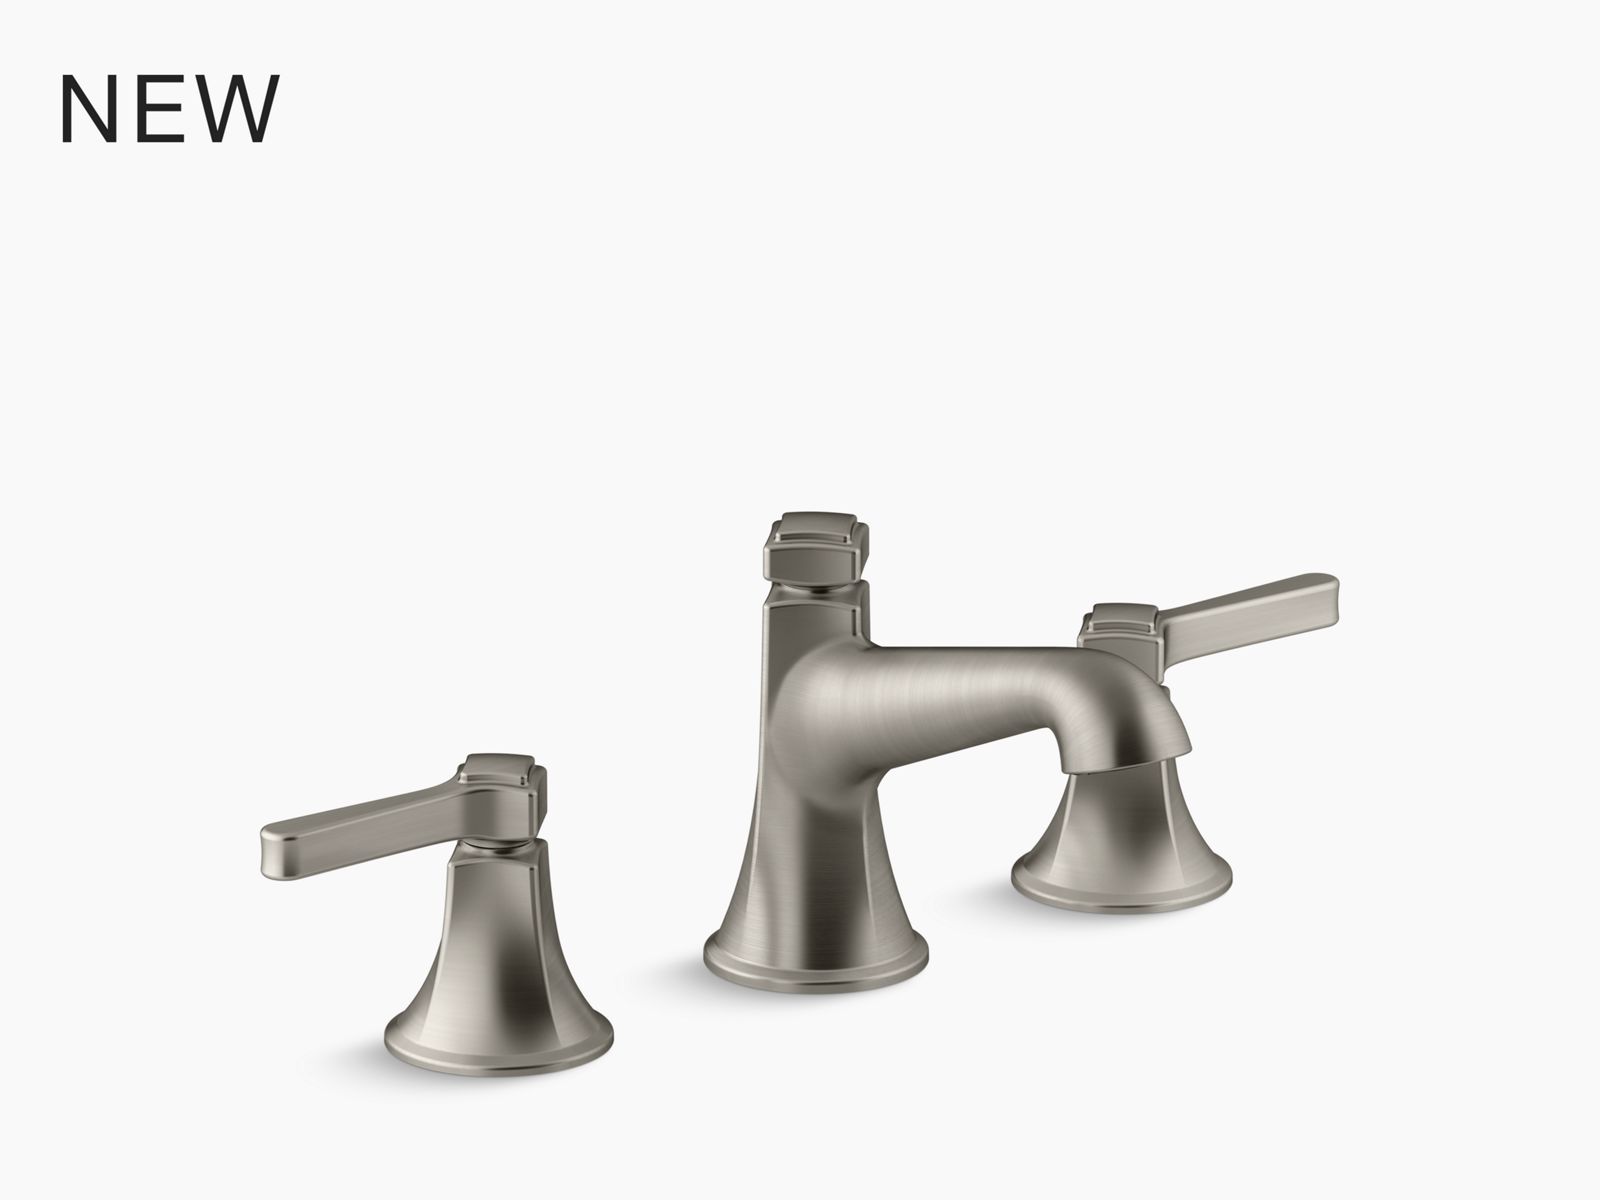 FINIAL Widespread Lavatory Faucet, Traditional Lever Handles